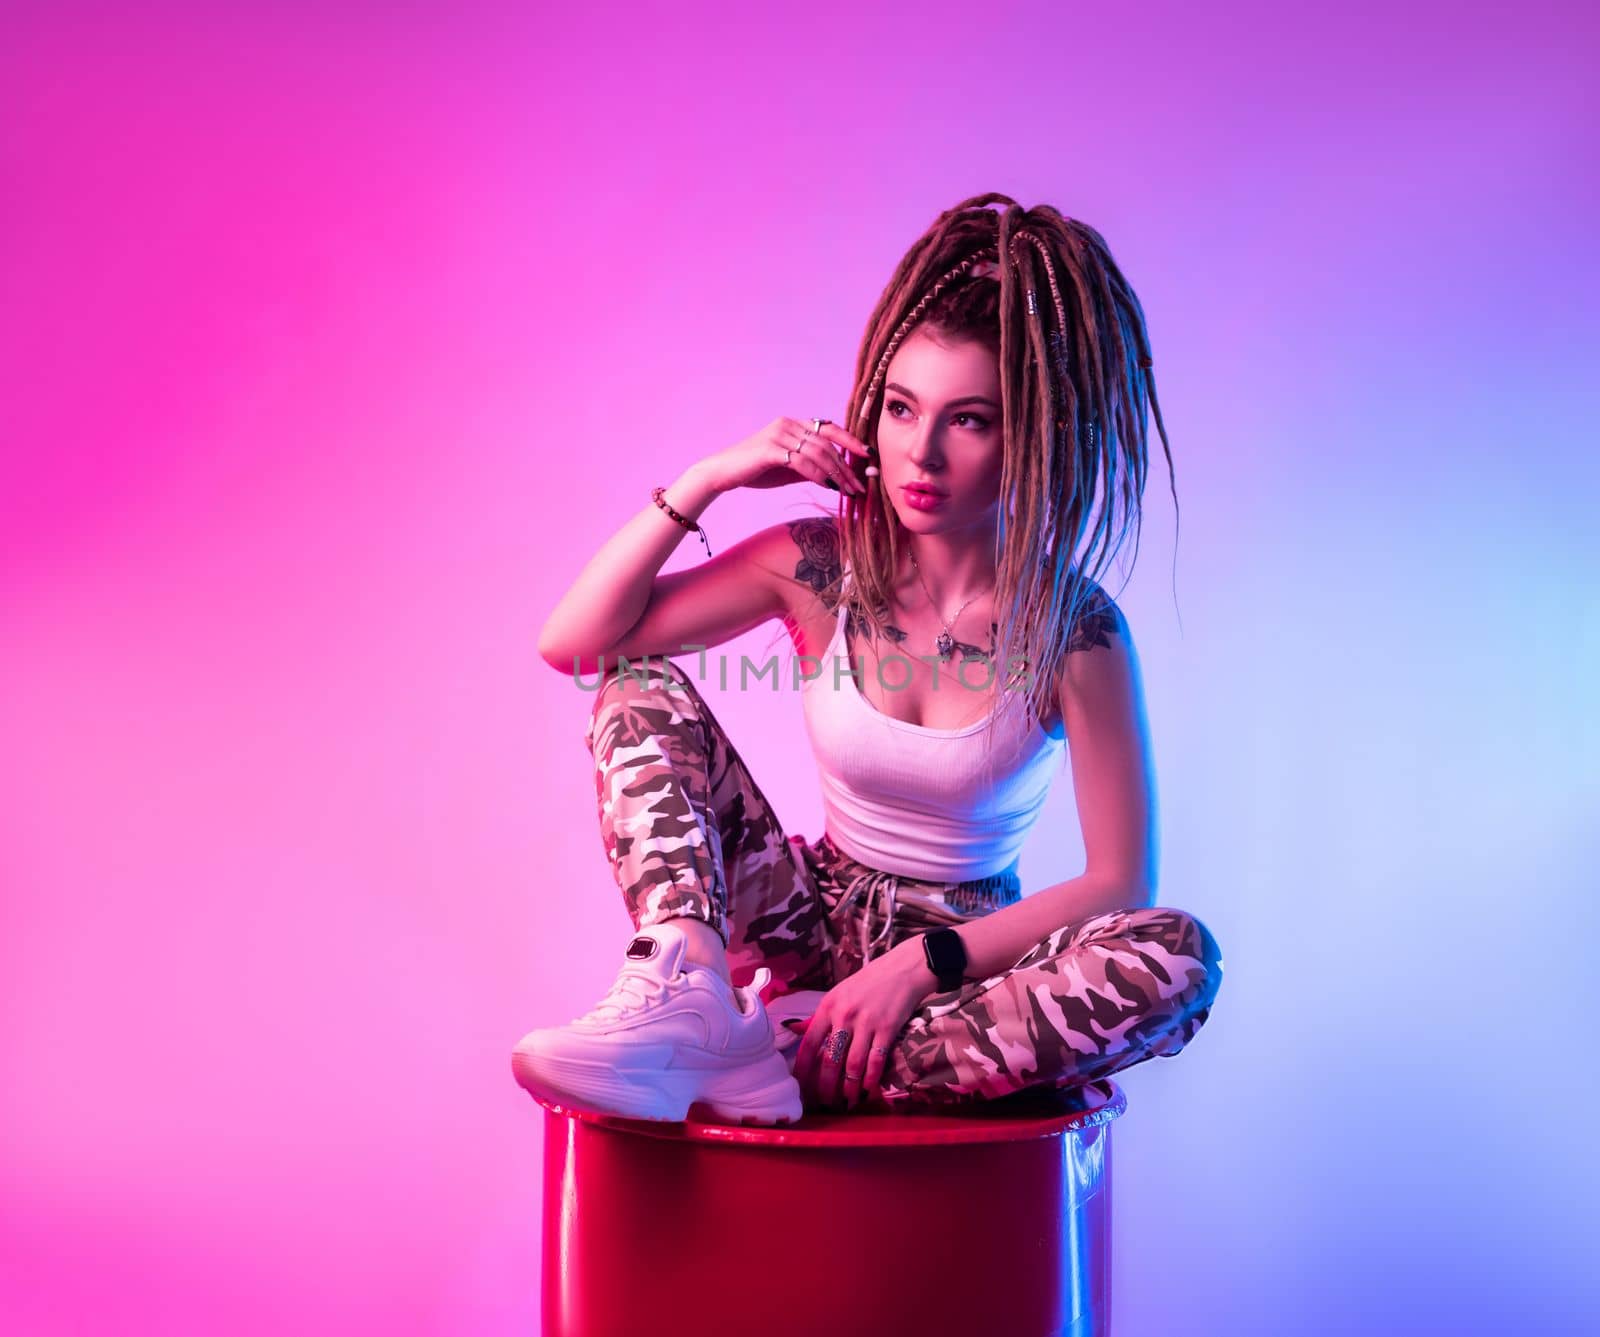 sexy girl with braided dreadlocks on her head in neon light on a light background copy paste by Rotozey